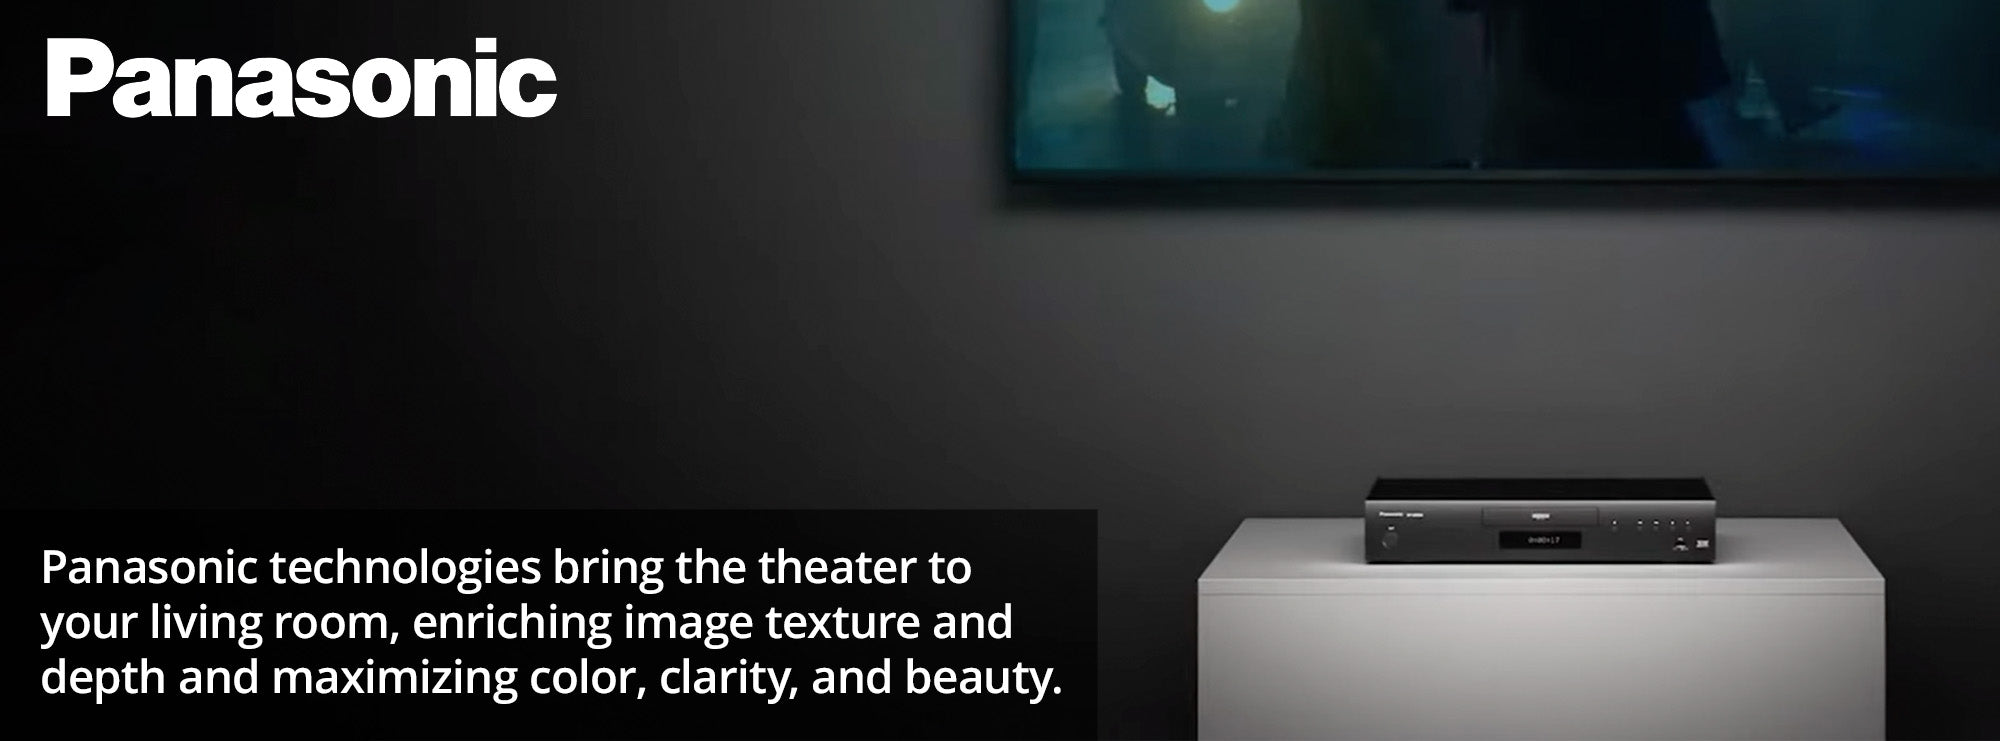 Panasonic technologies bring the theater to your living room, enriching image texture and depth and maximizing color, clarity, and beauty.